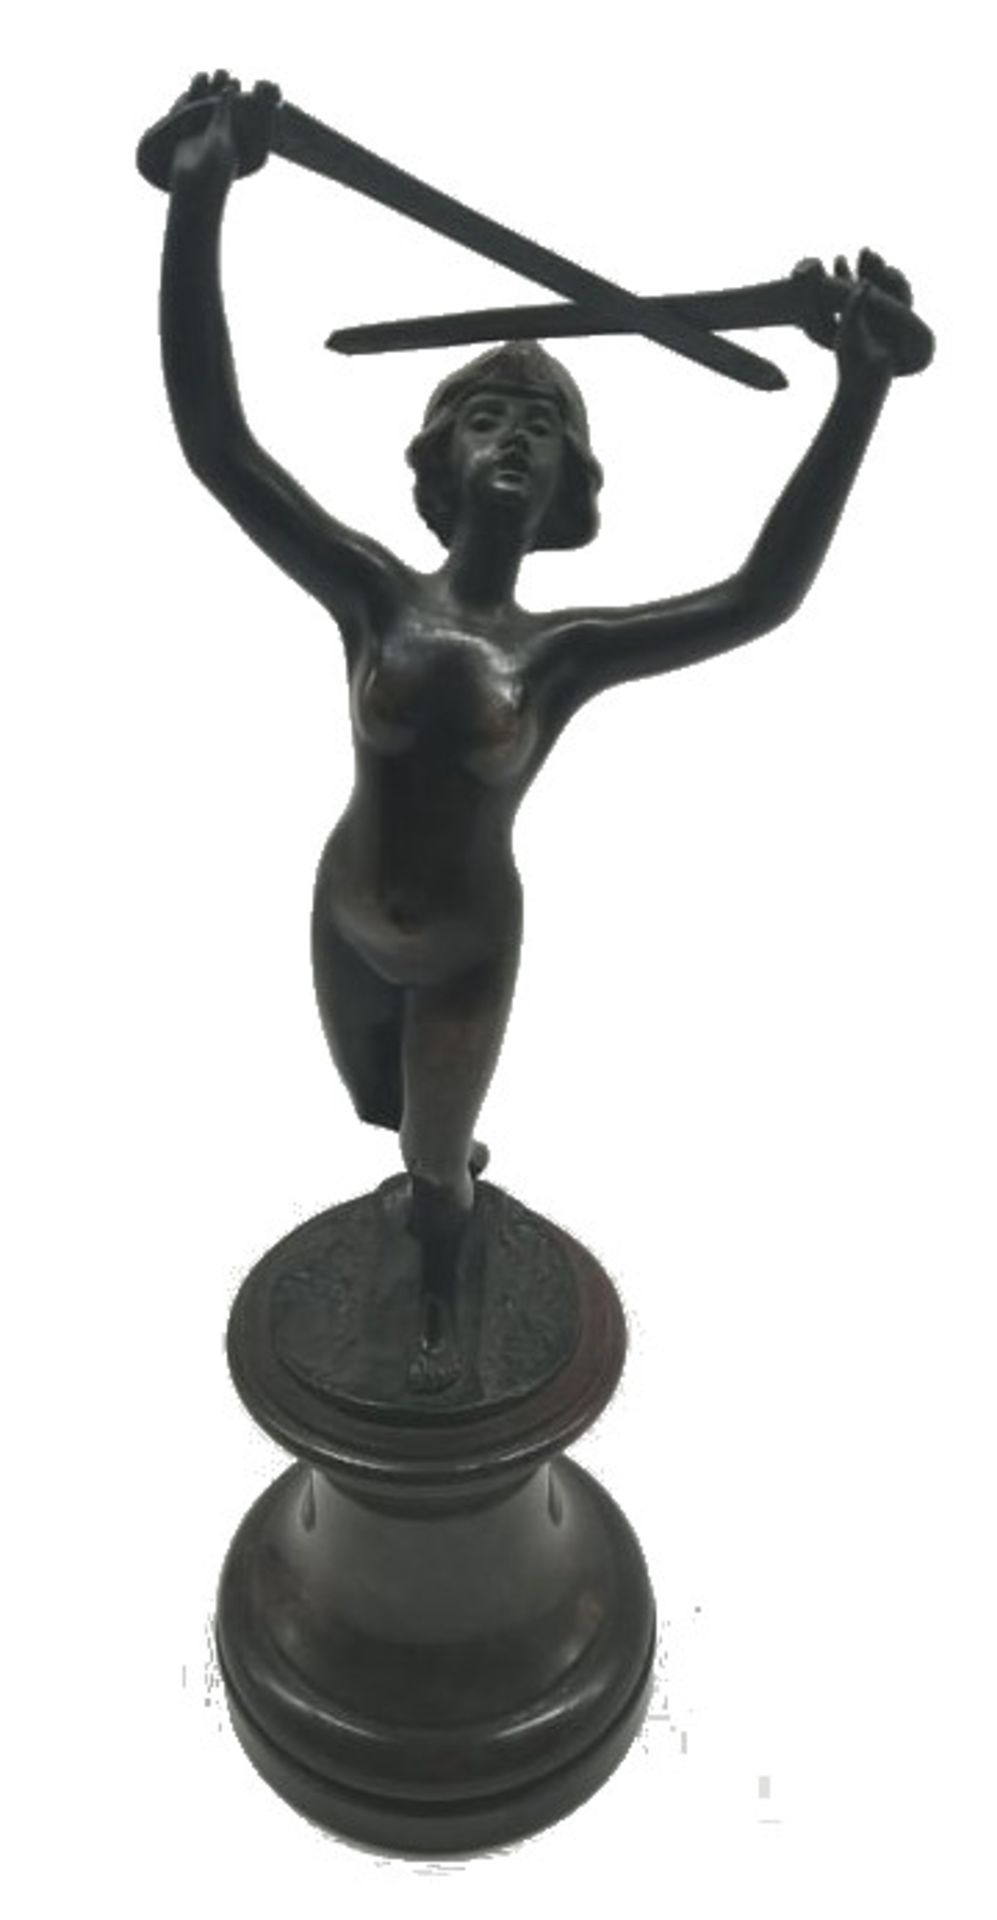 (Sculptor, German around 1900/20) Nude with swords, patinated bronze, plinth inscribed: "O. Opitz,